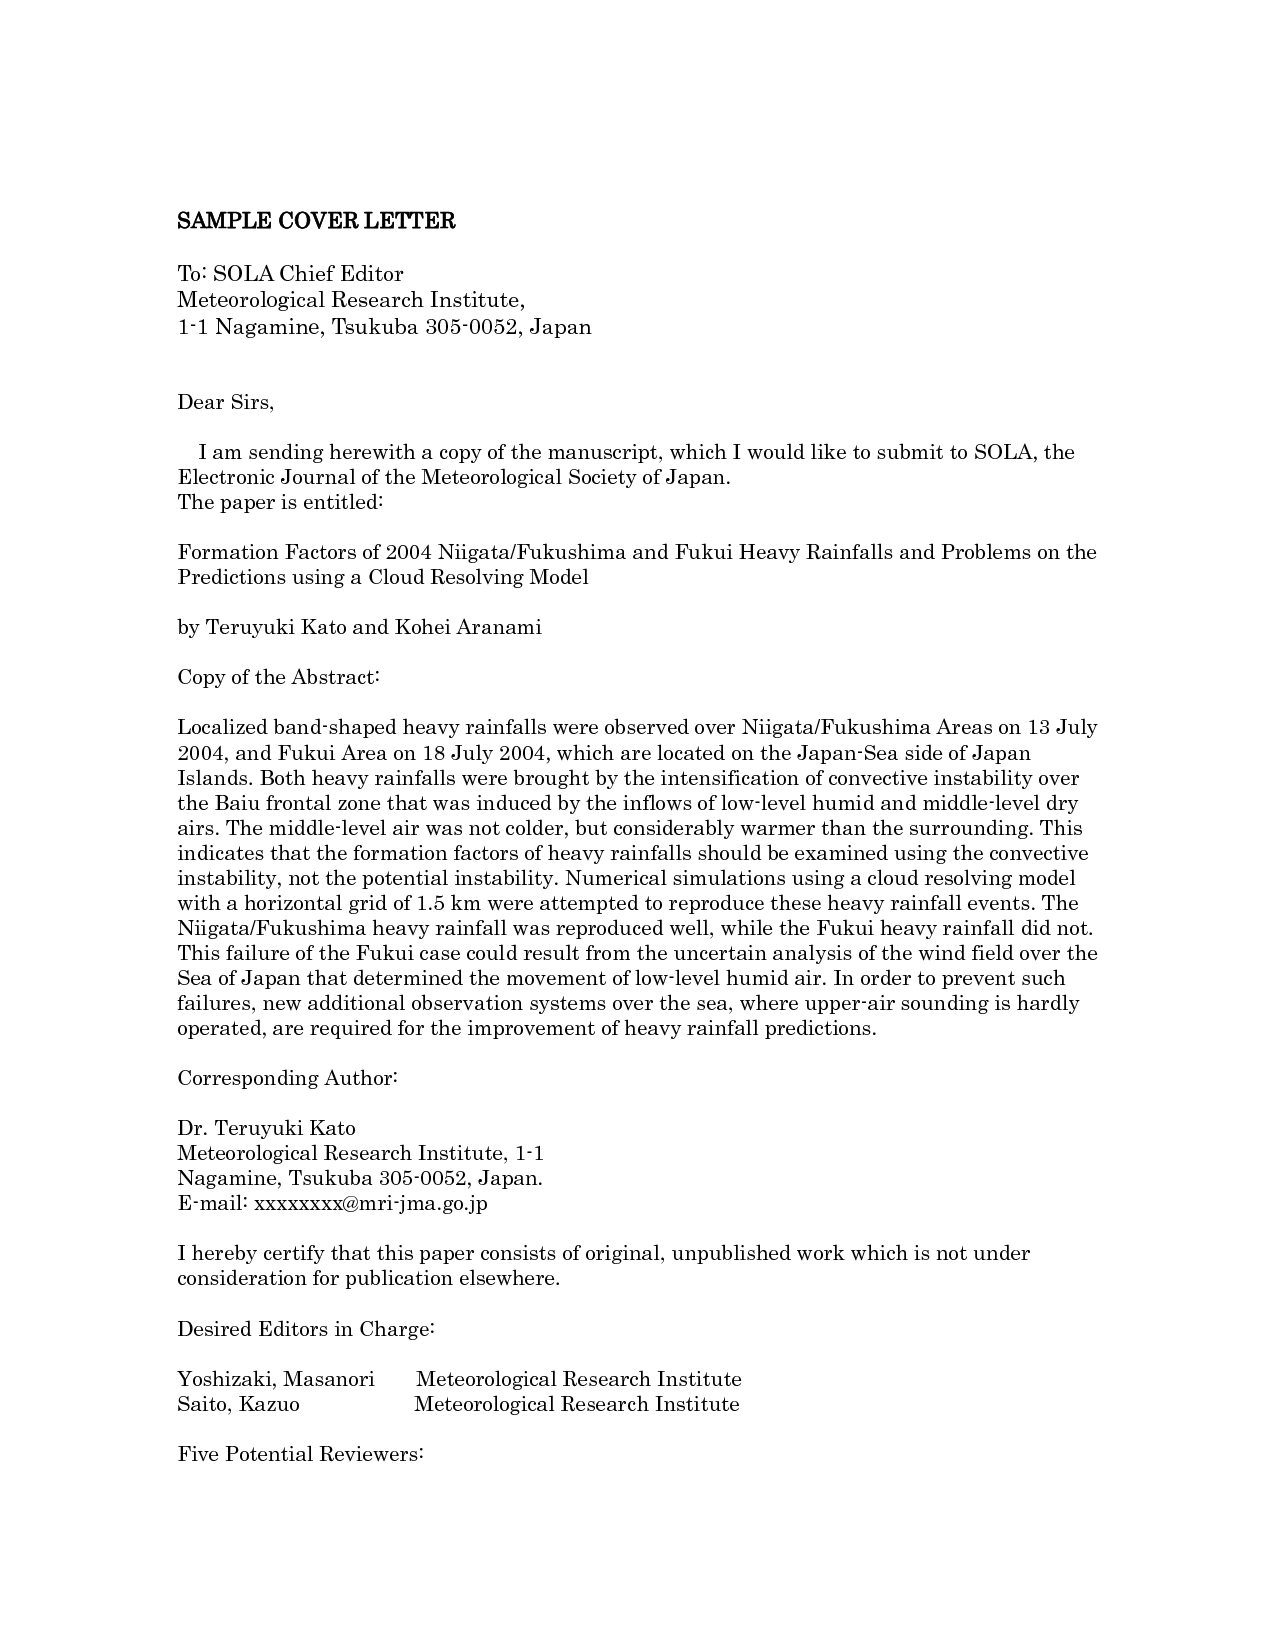 cover letter to journal editor sample